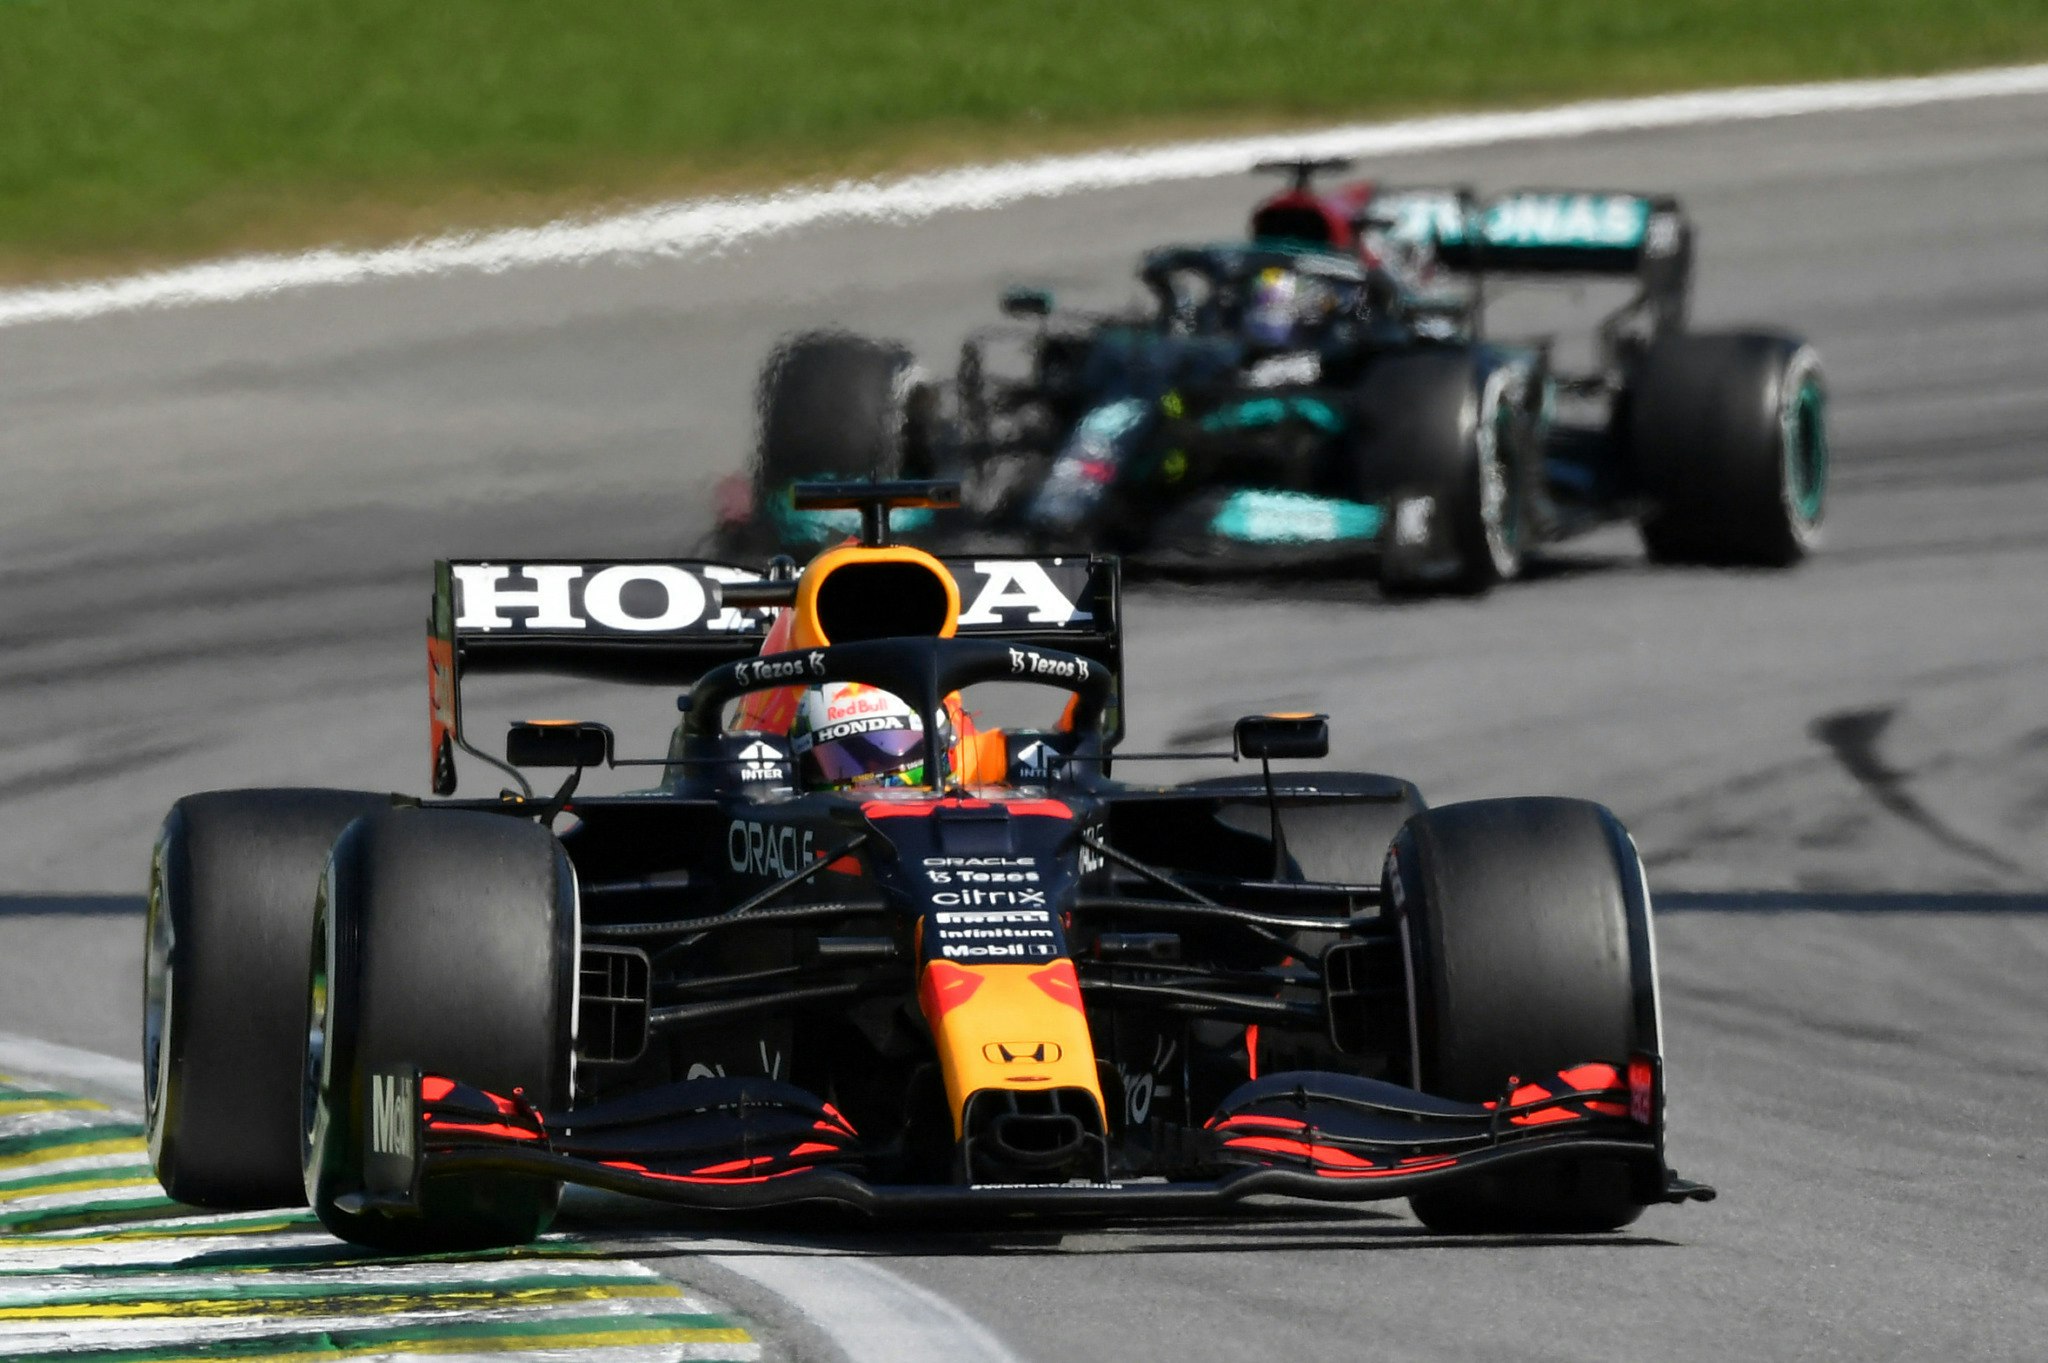 TSN Buckles Up for Complete Live Coverage of the 2022 FIA FORMULA ONE WORLD CHAMPIONSHIP Season, Beginning March 18